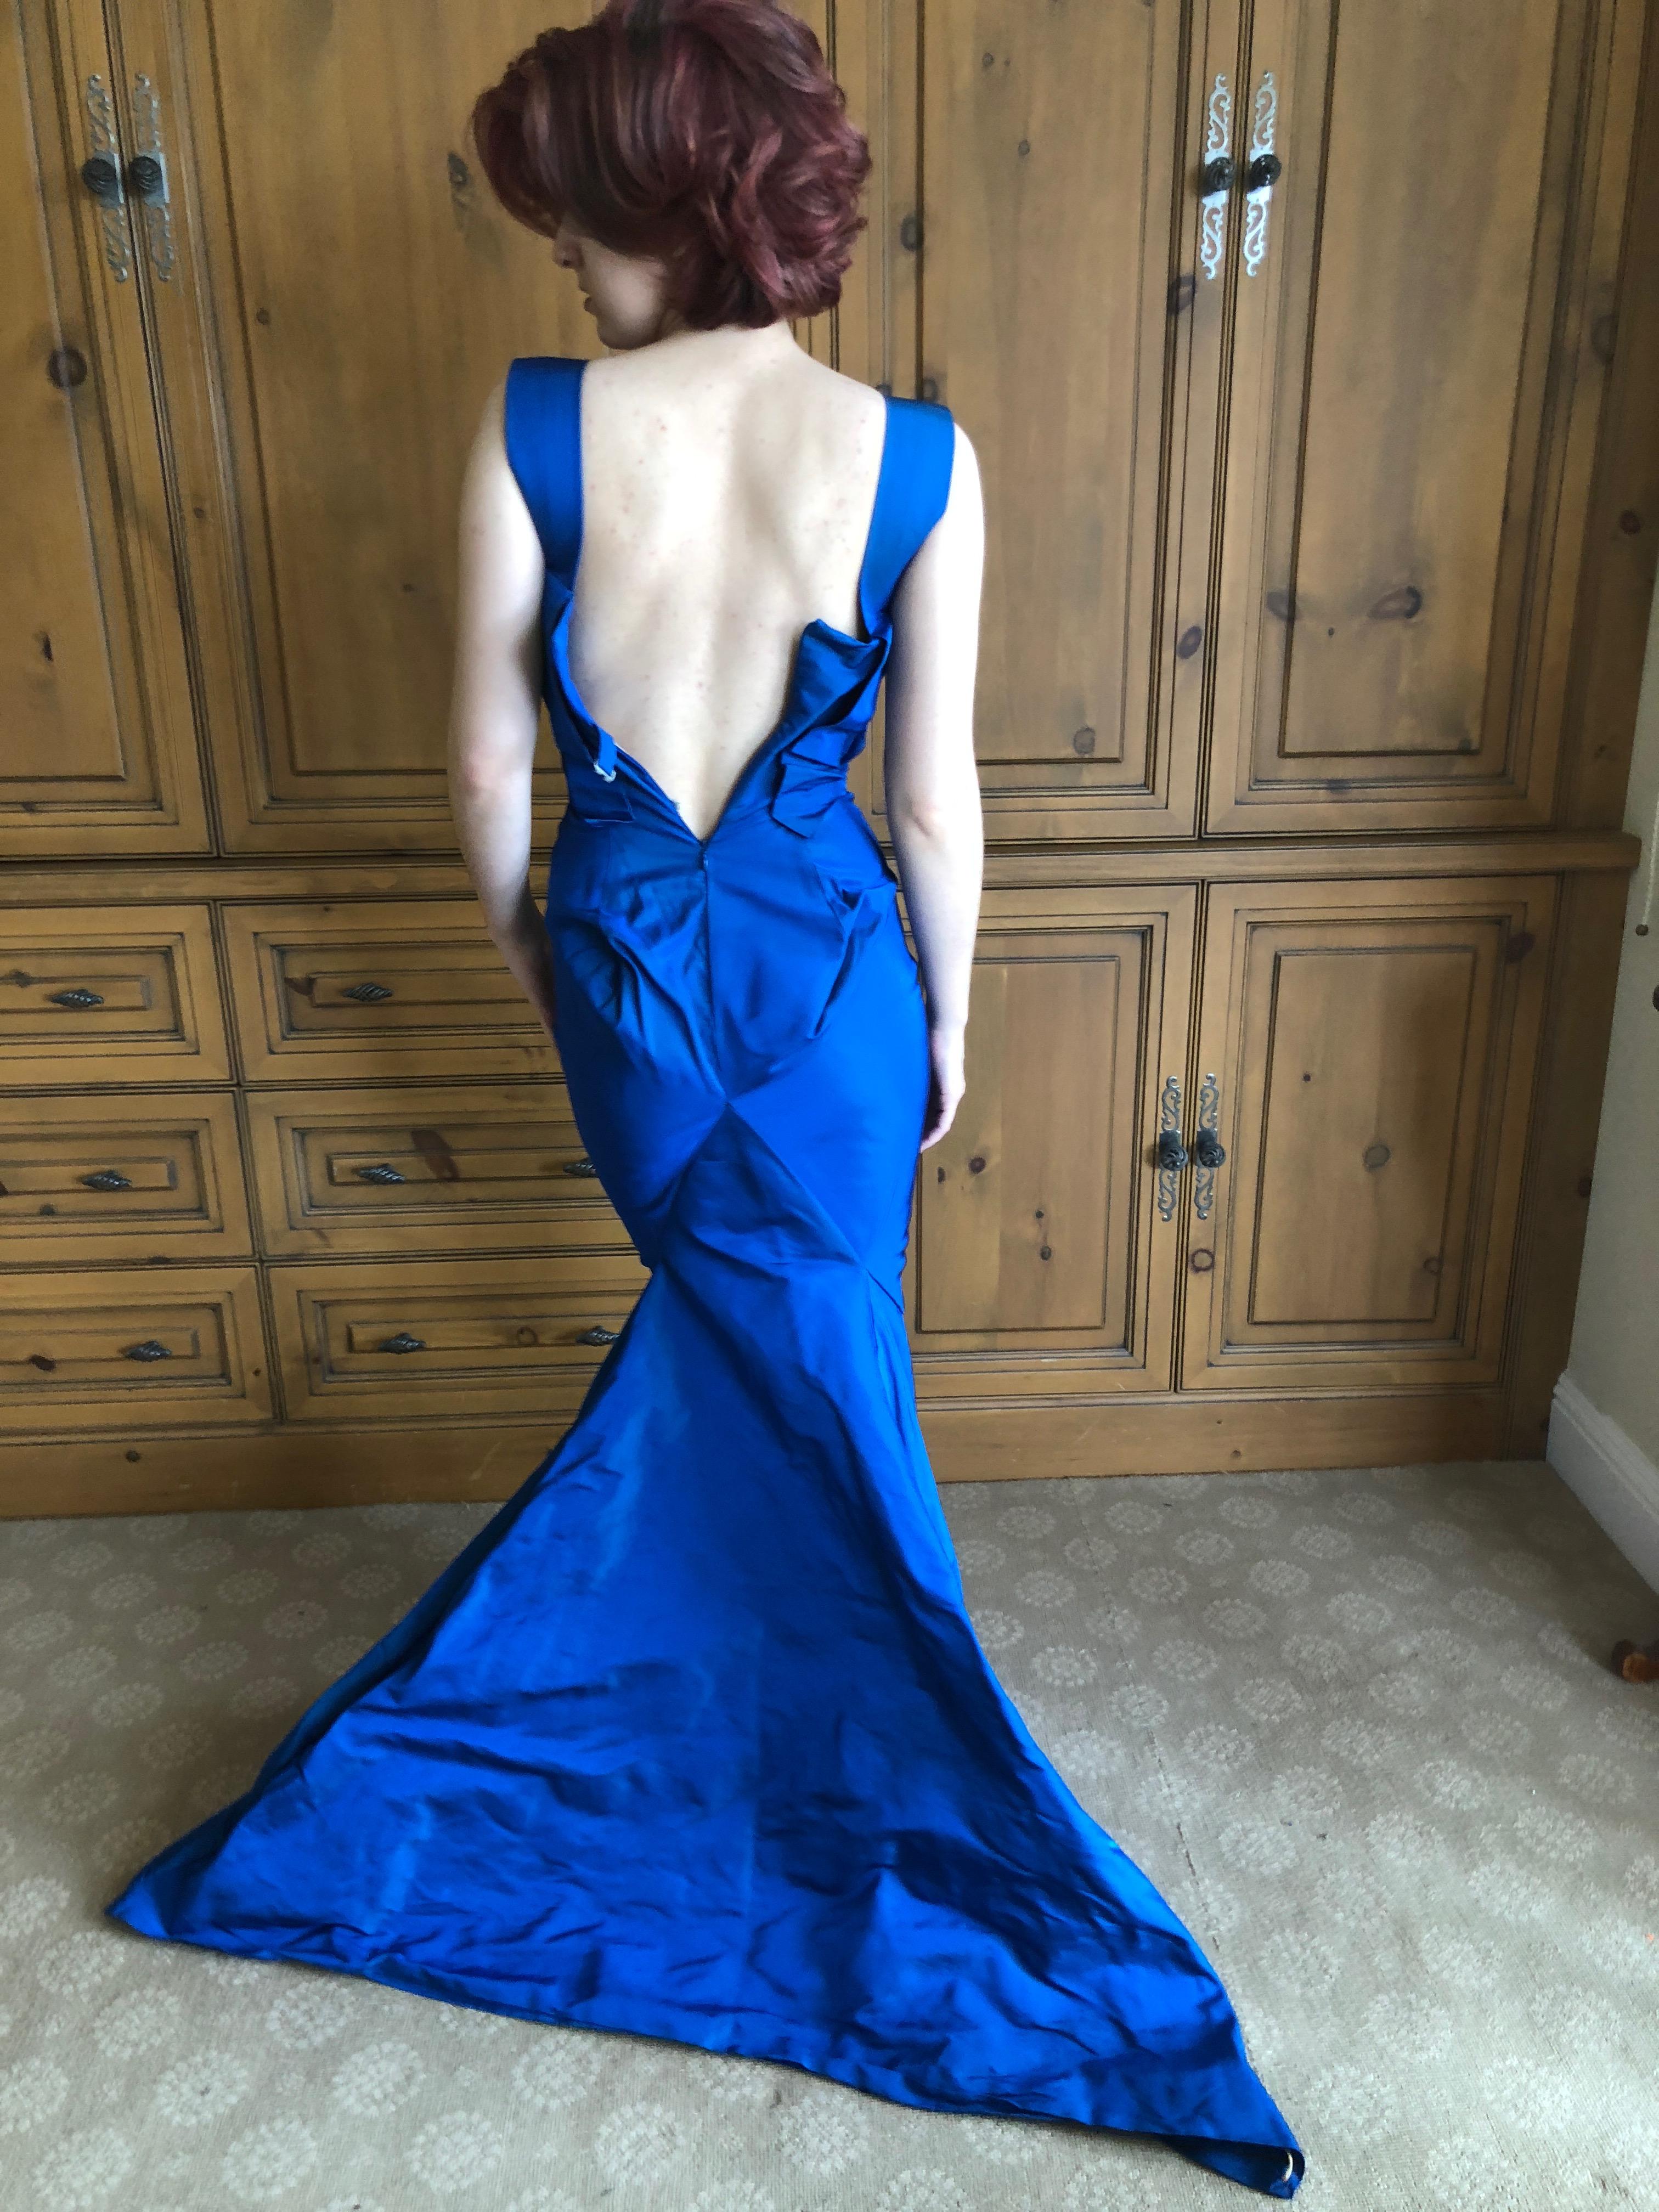 Vivienne Westwood Gold Label Blue Taffeta Fishtail Train Evening Dress, 2011 In Excellent Condition For Sale In Cloverdale, CA